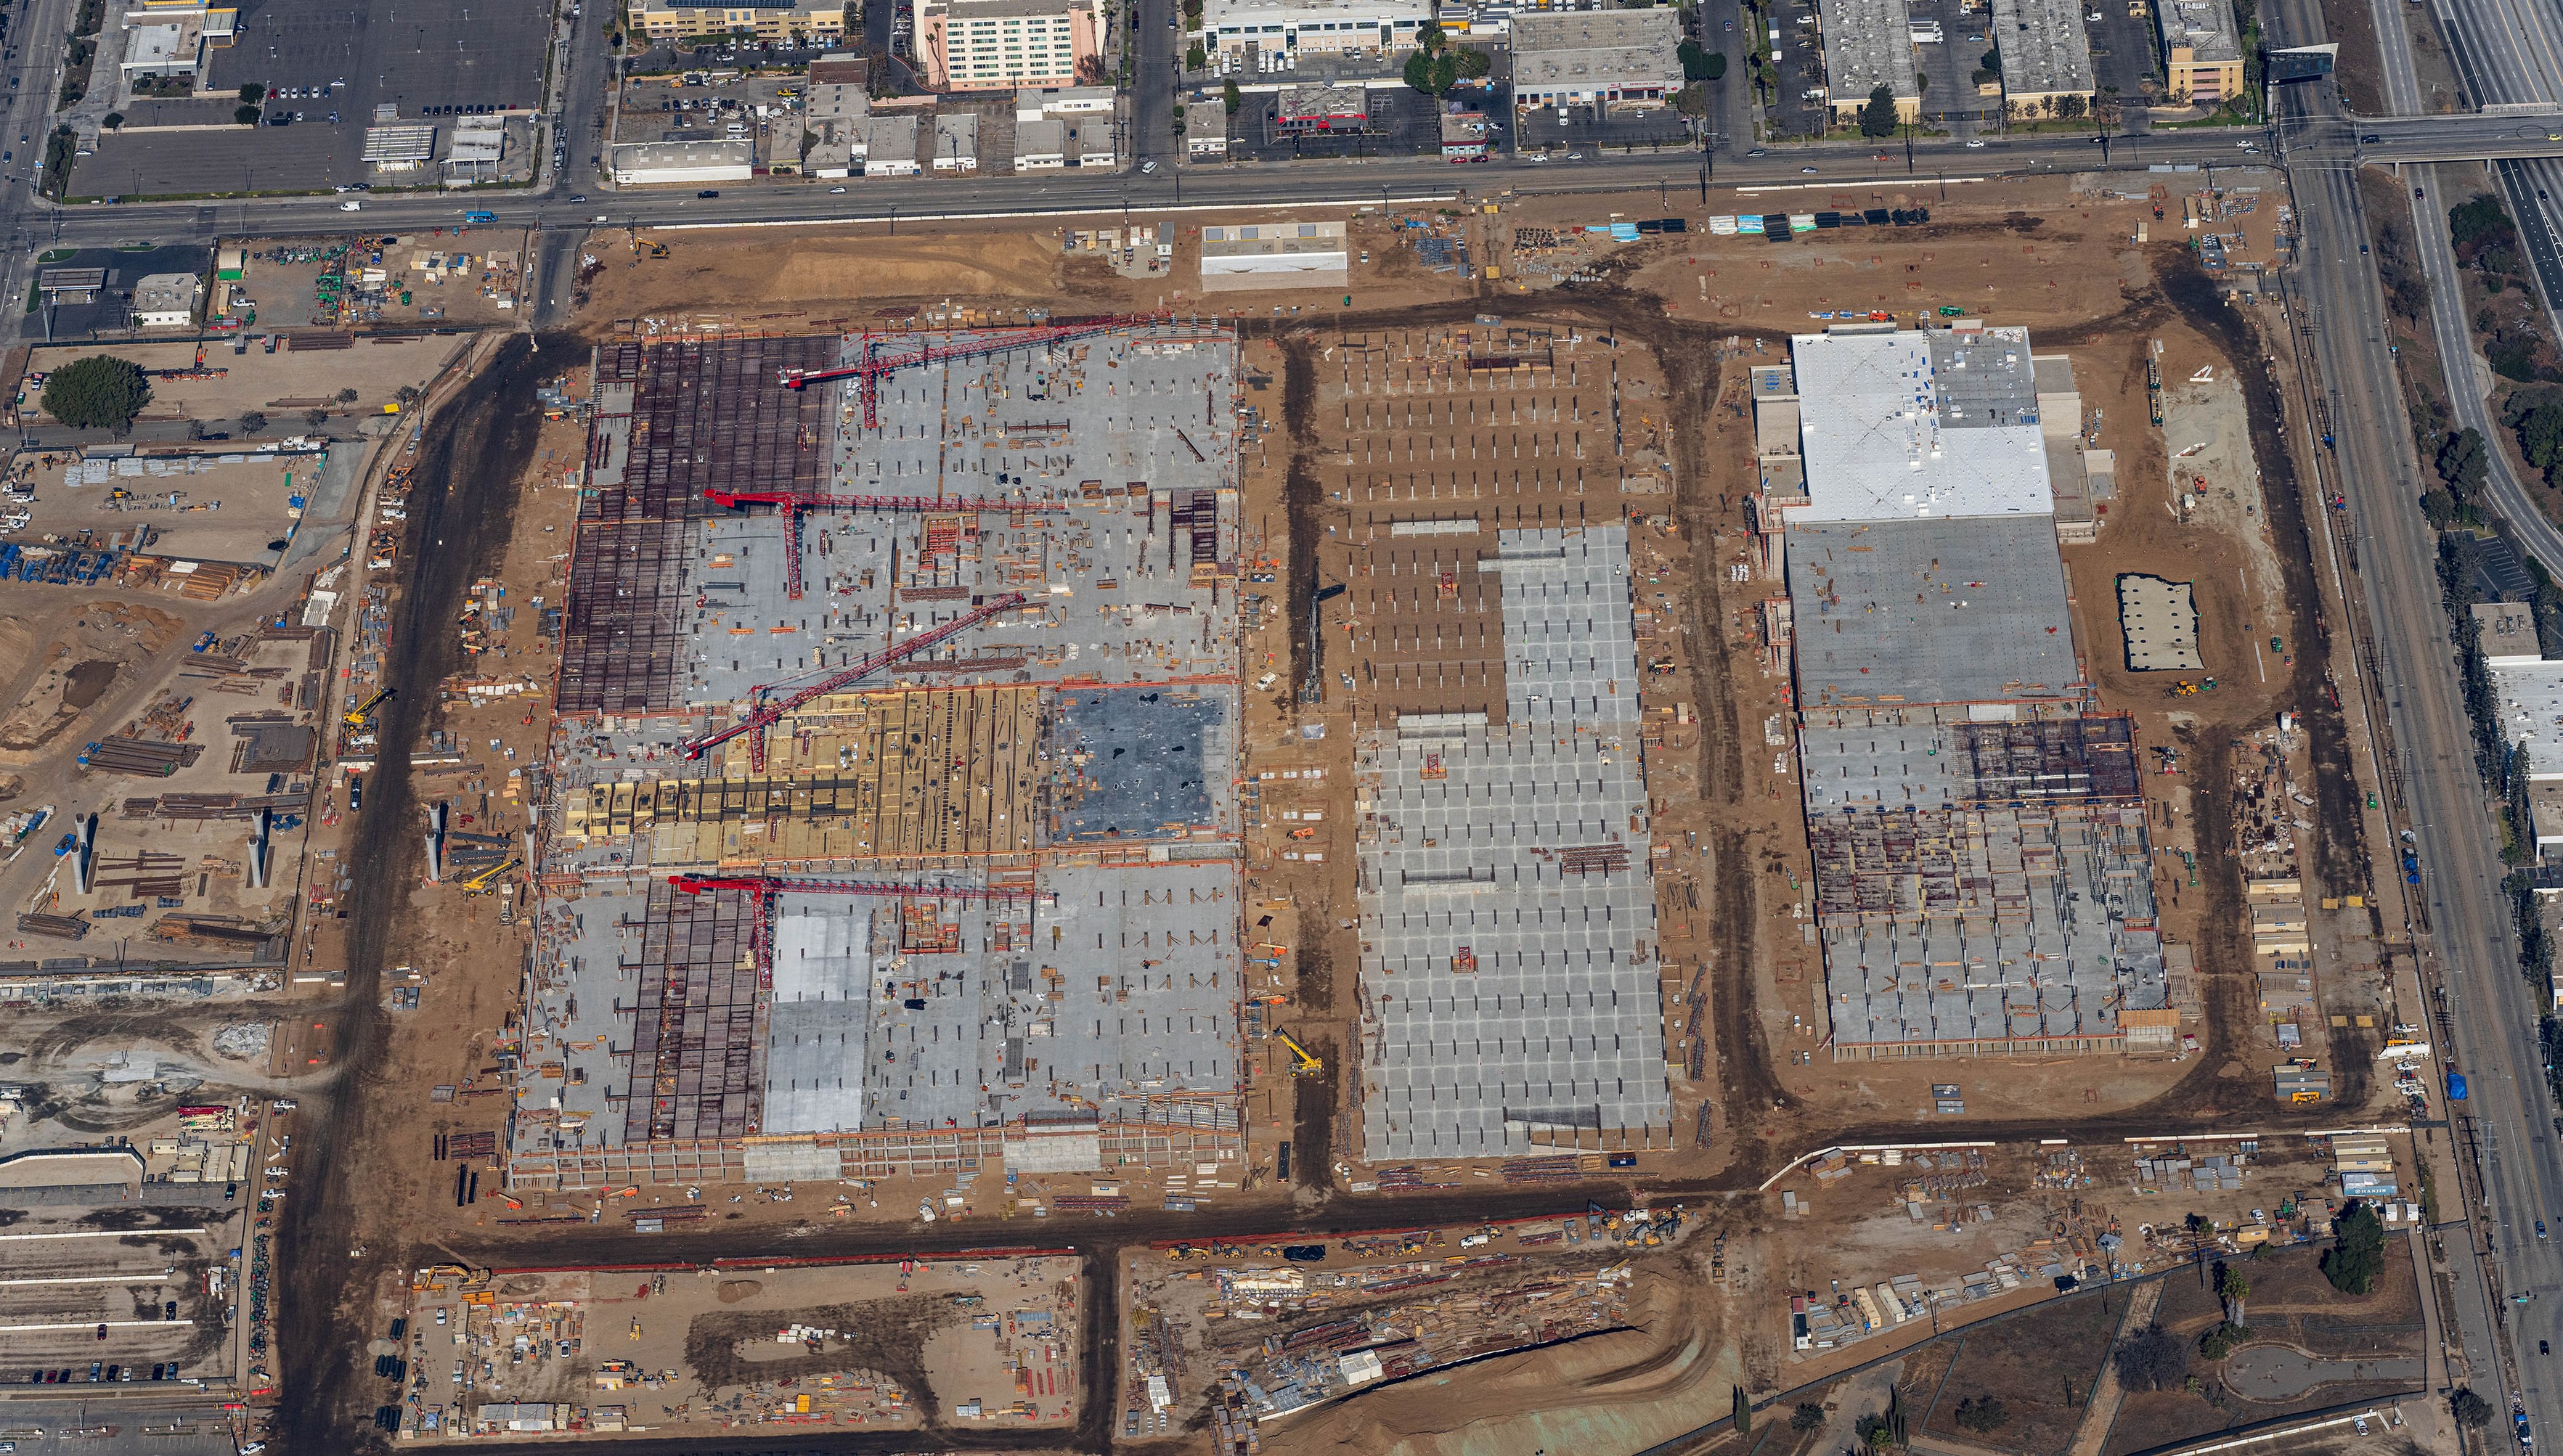 Aerial view of Consolidated Rent-A-Car (ConRAC) facility construction site.